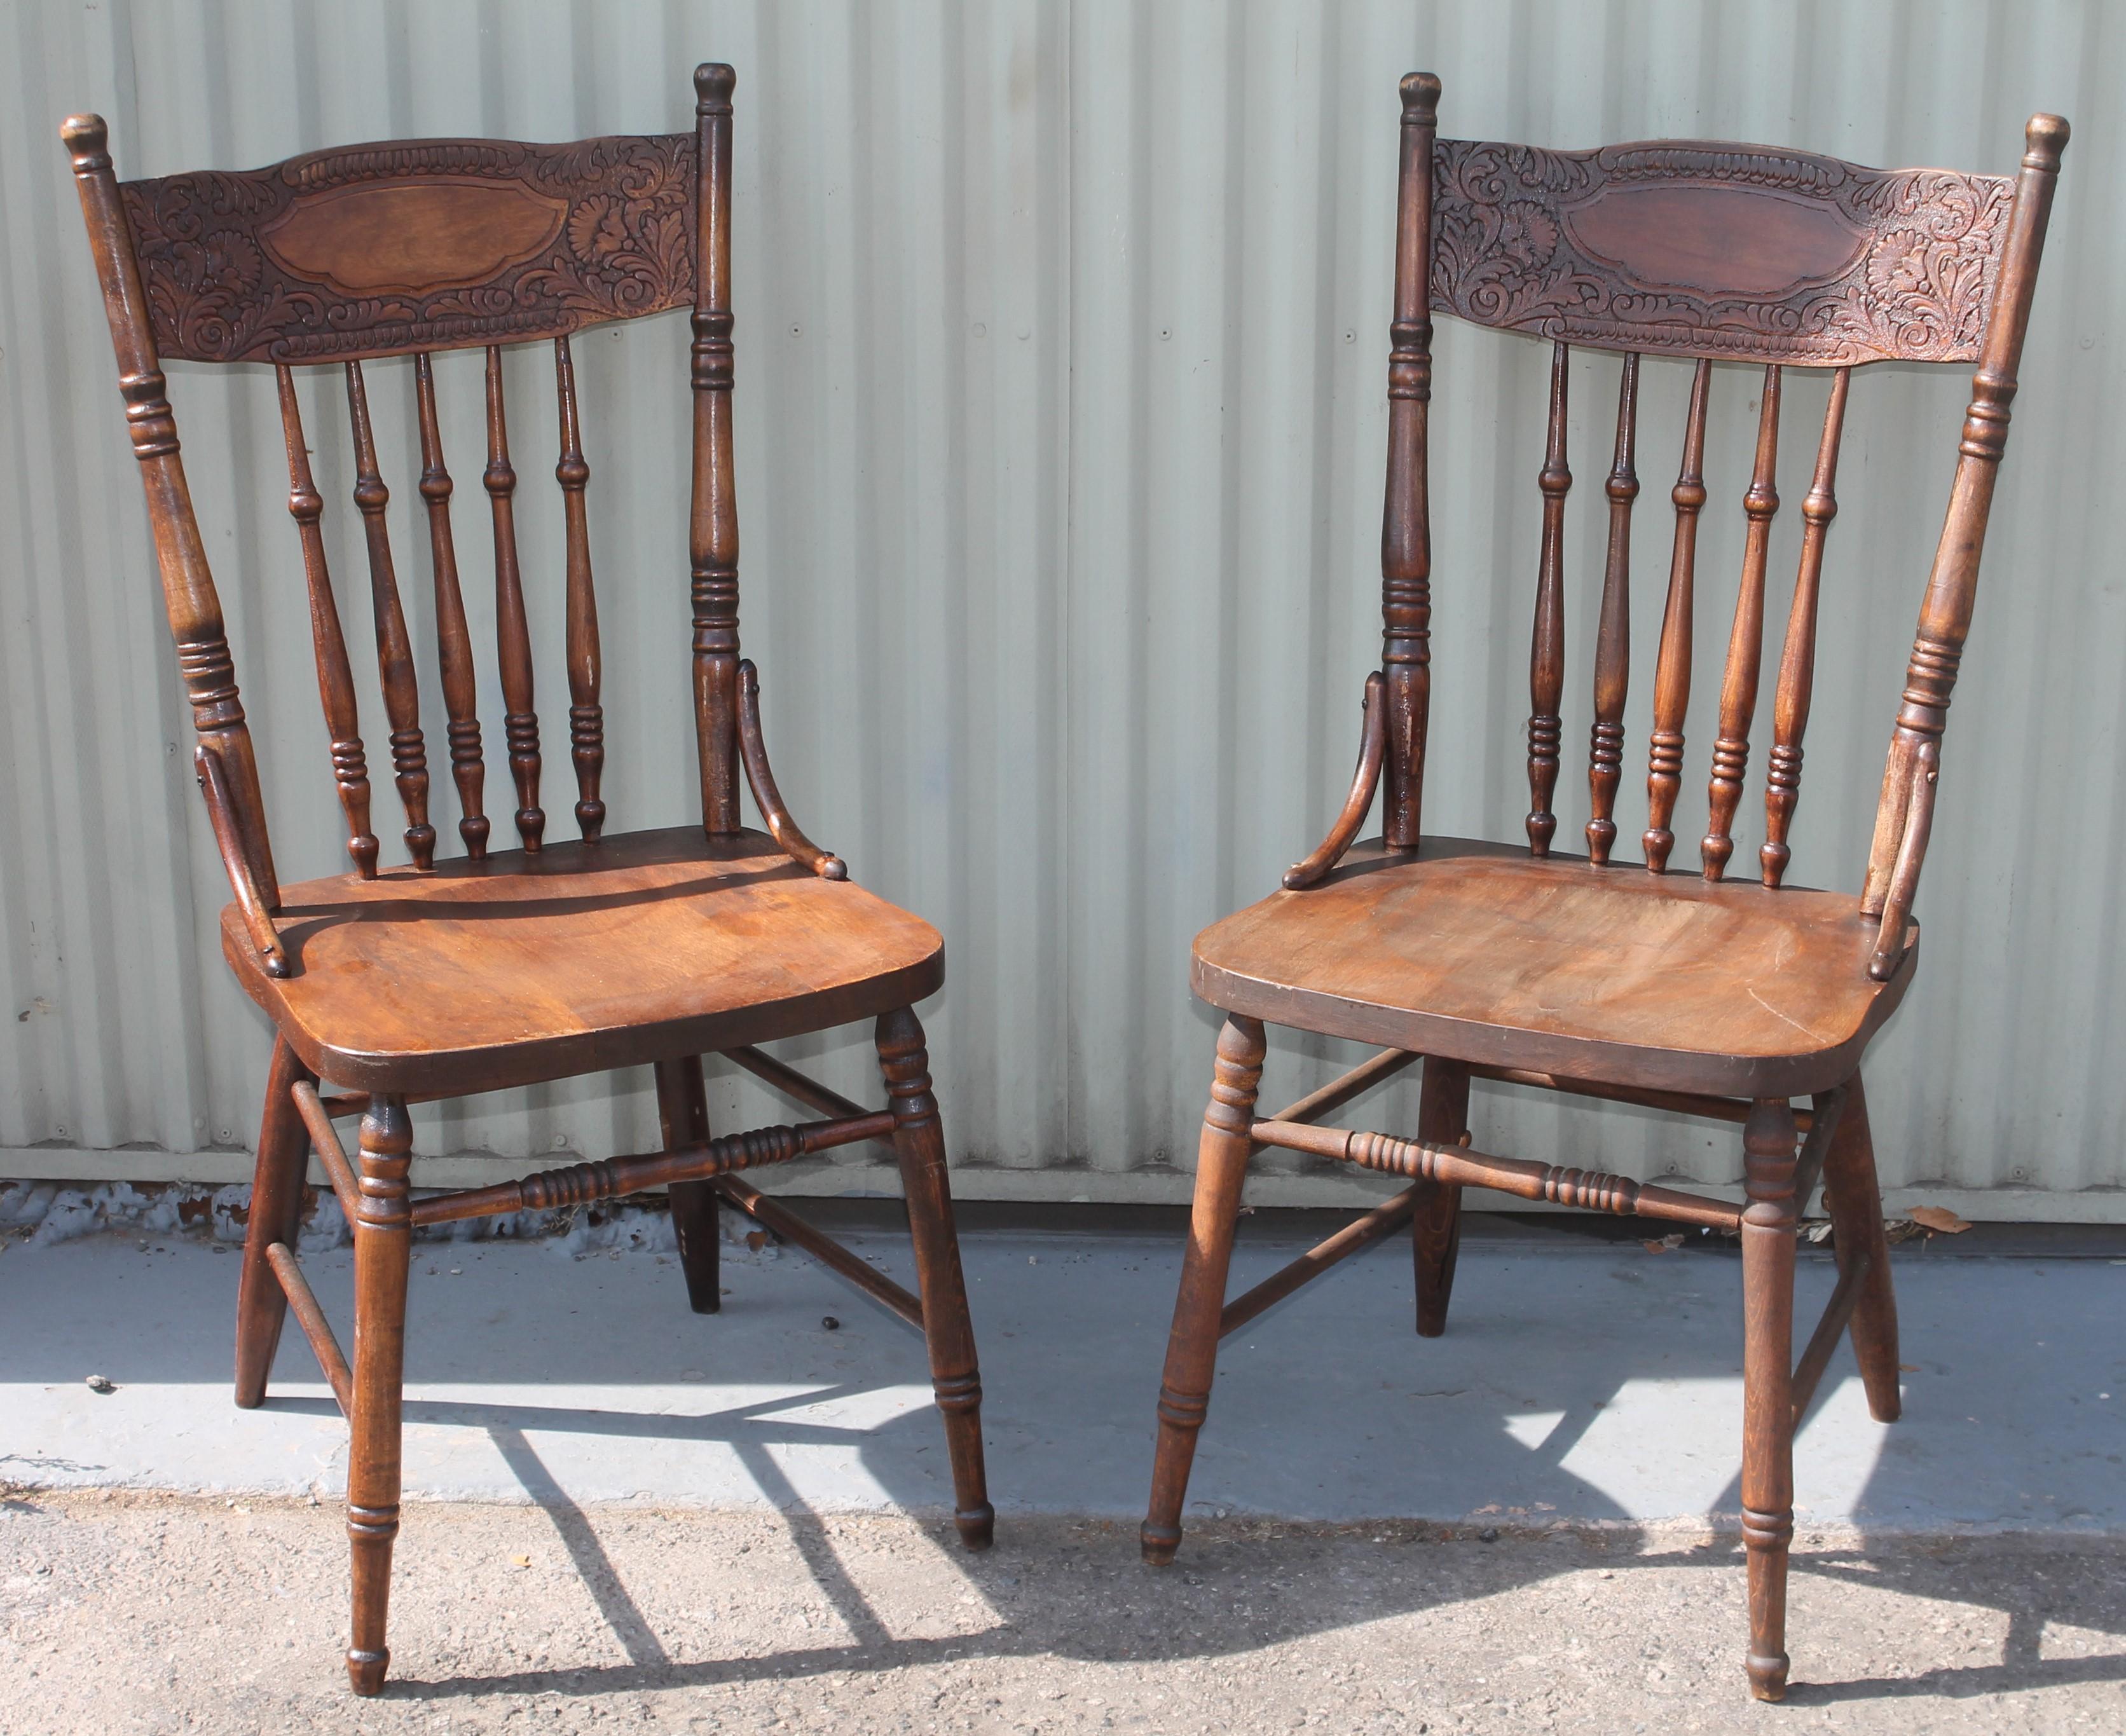 ranch style chairs